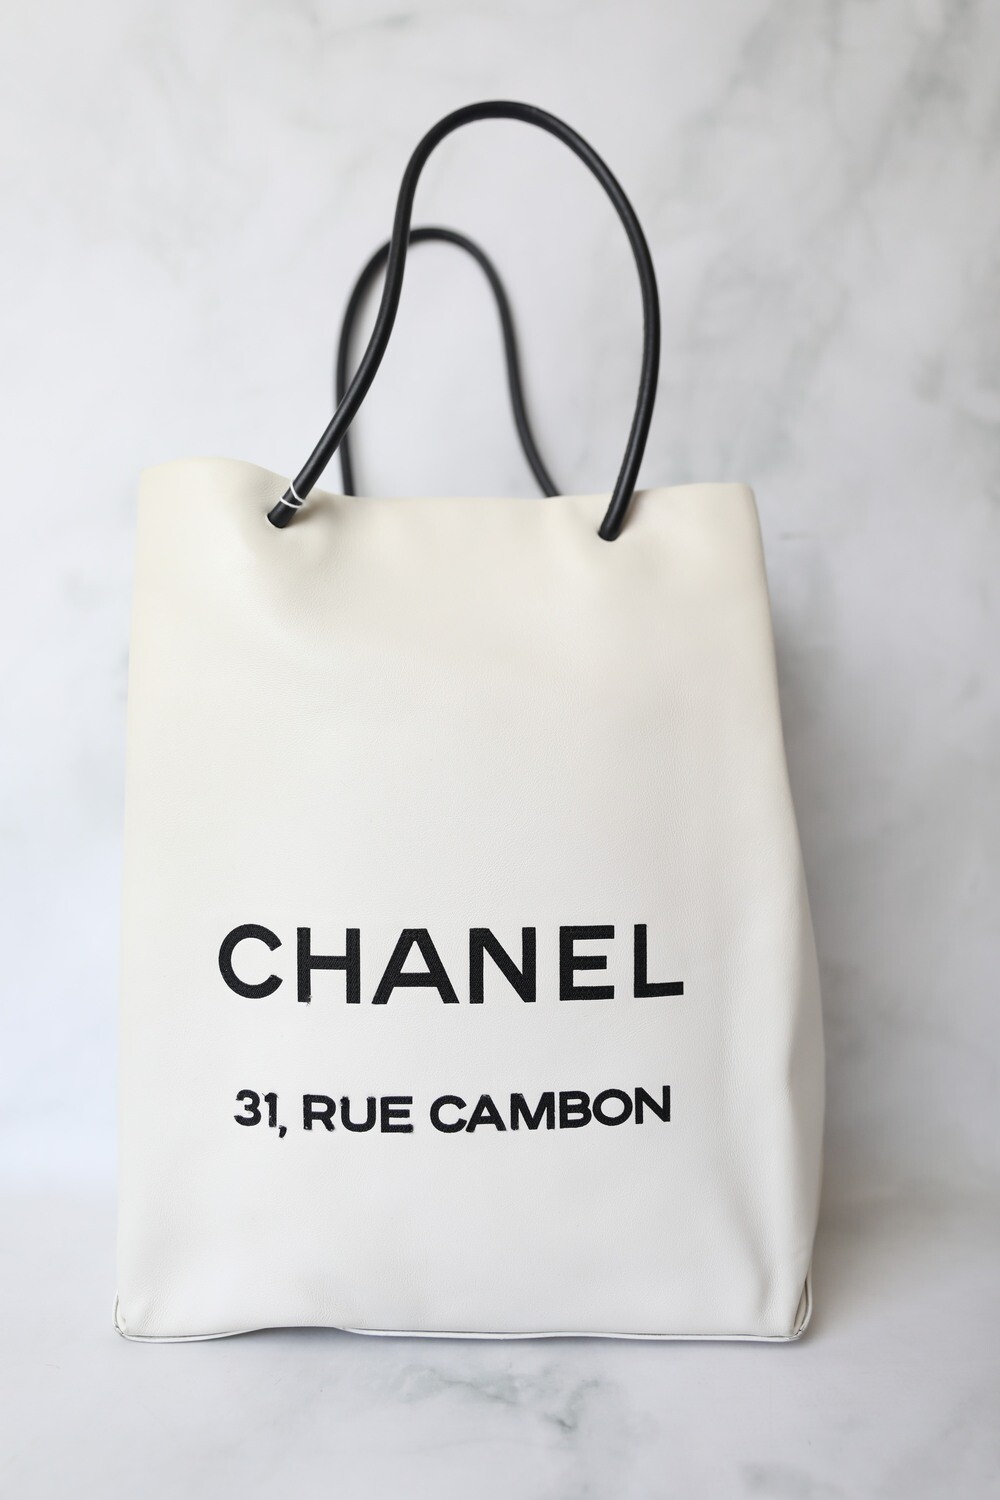 Chanel Shopping Essential Bag Medium Tote, White with Black Lettering,  Preowned in Dustbag WA001